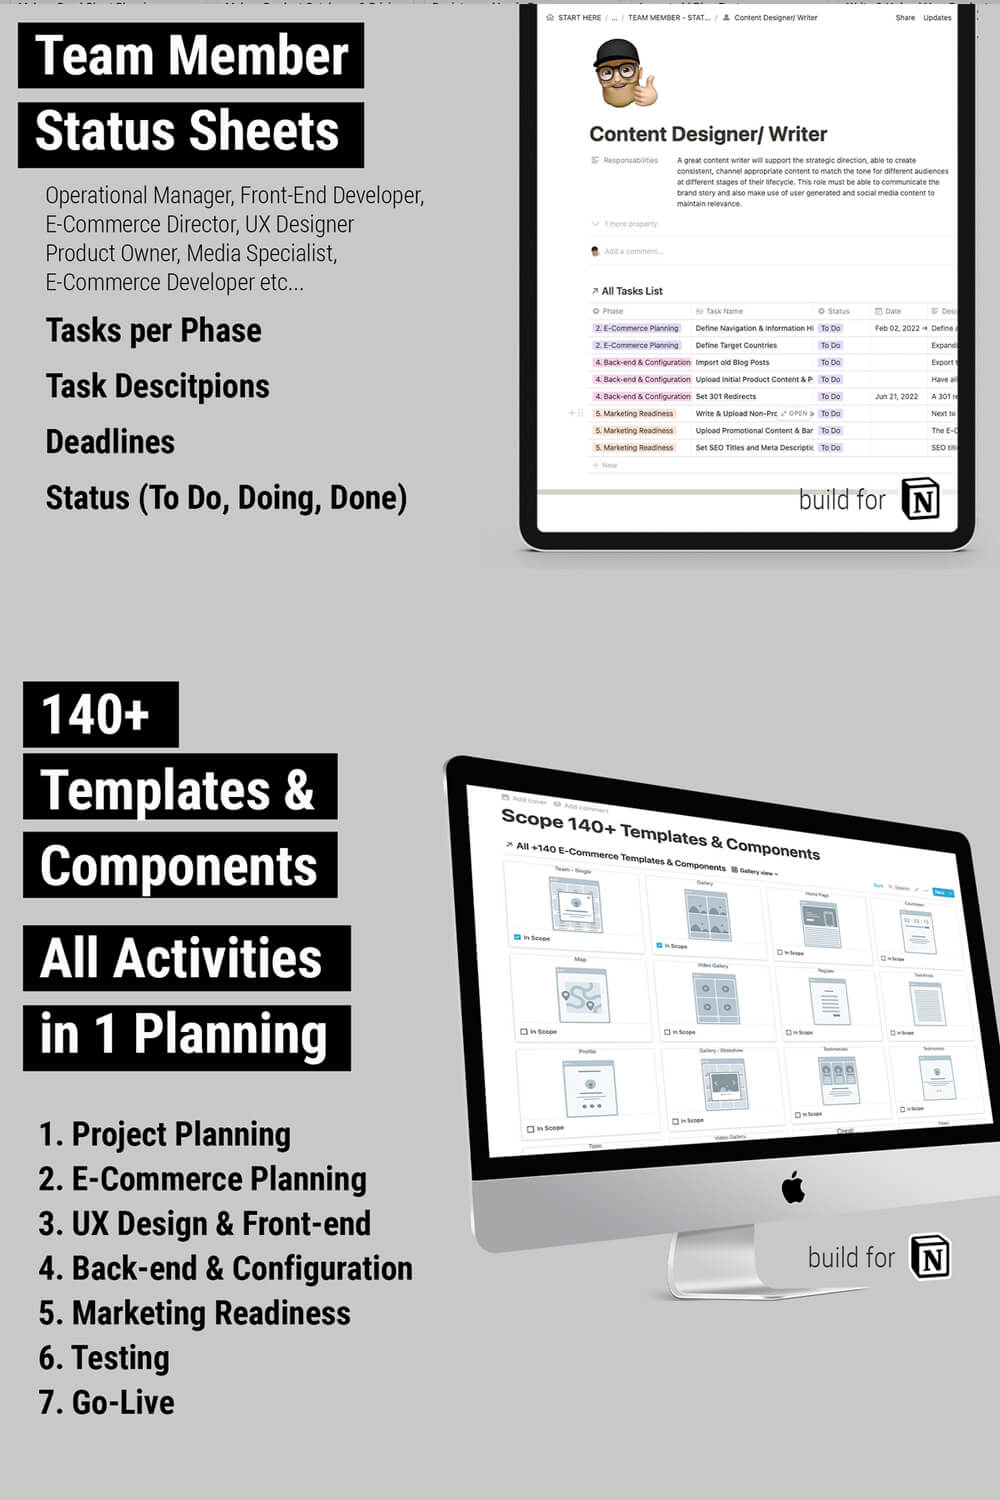 140+ templates and components.